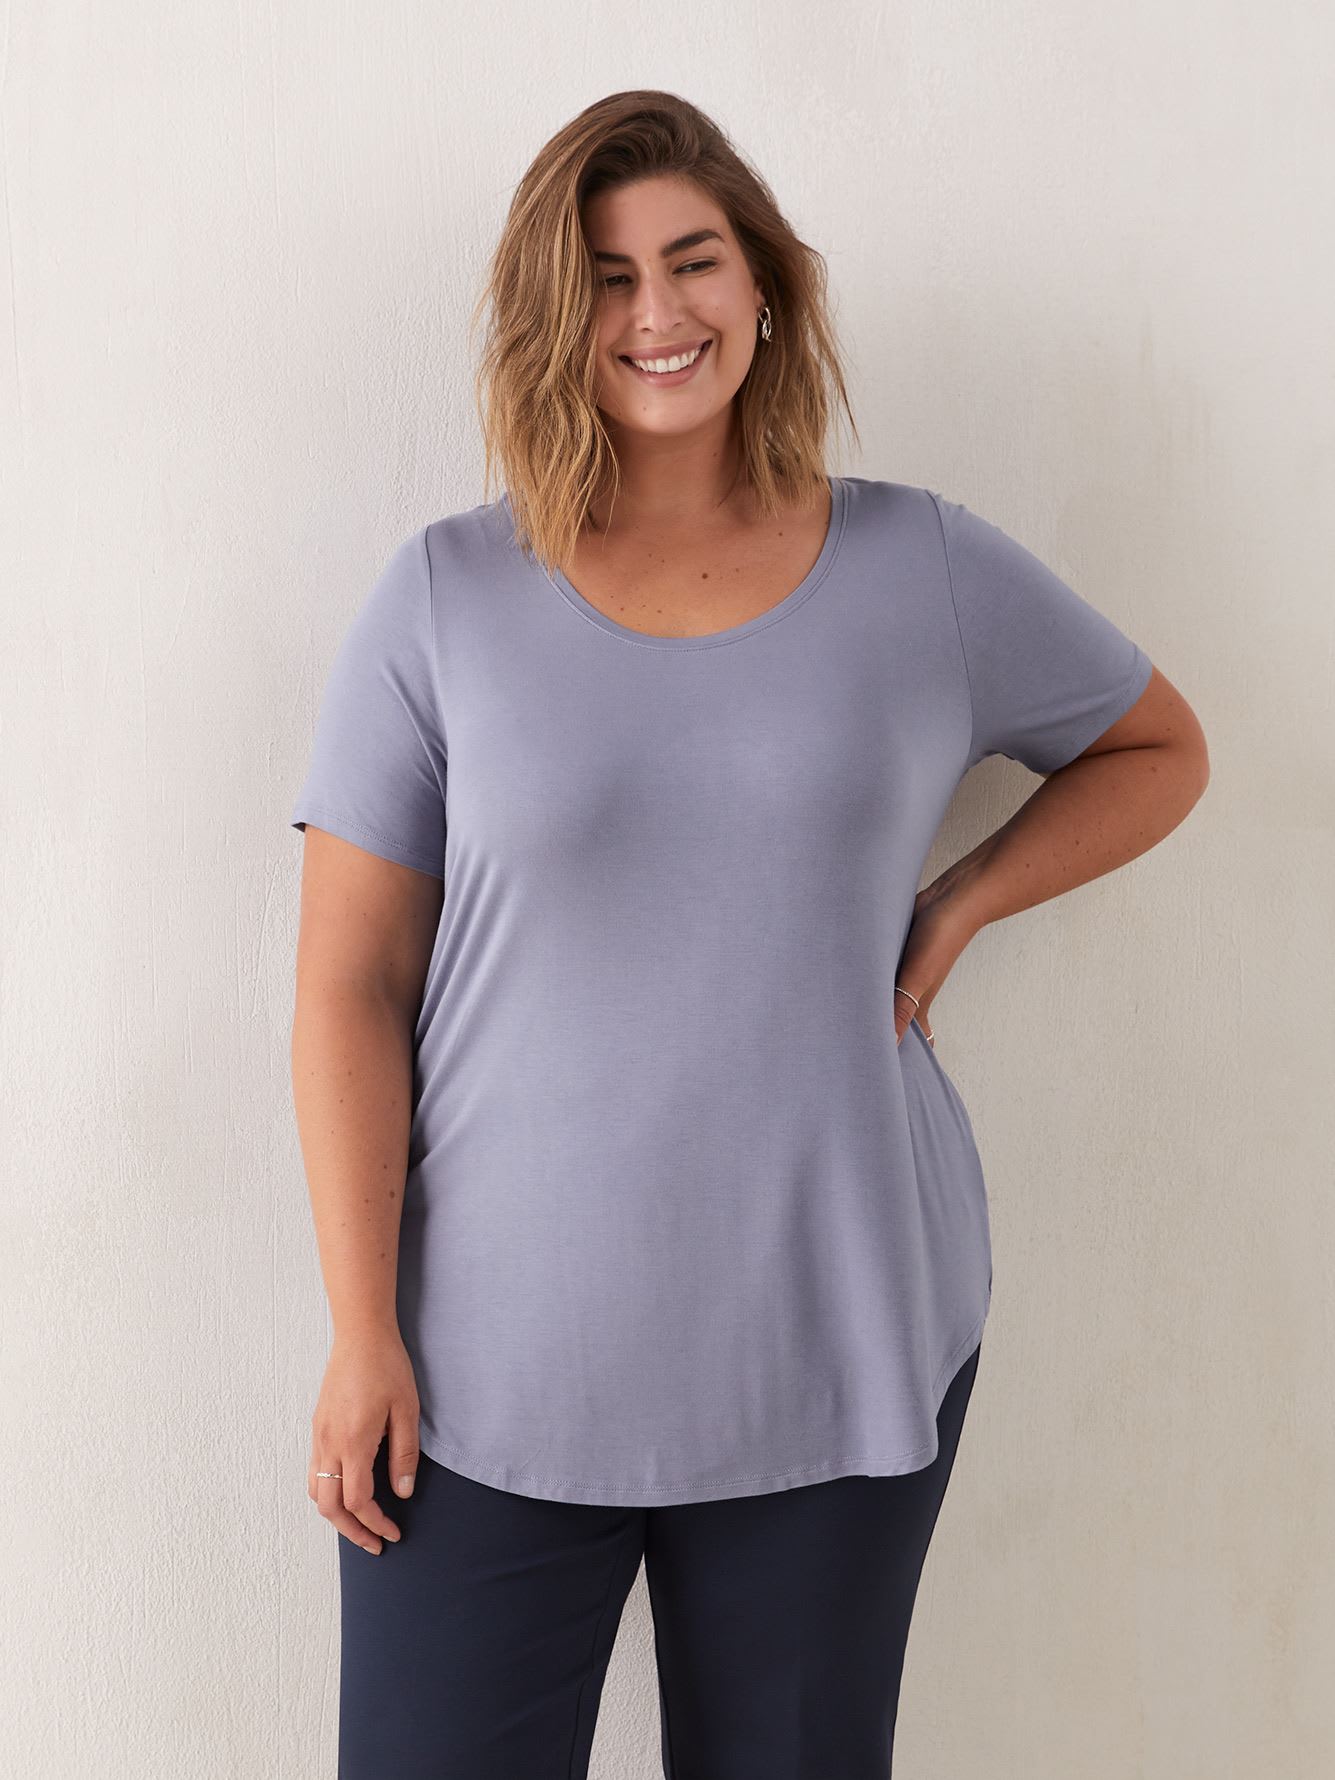 Modern Fit Scoop Neck T-Shirt - In Every Story | Penningtons